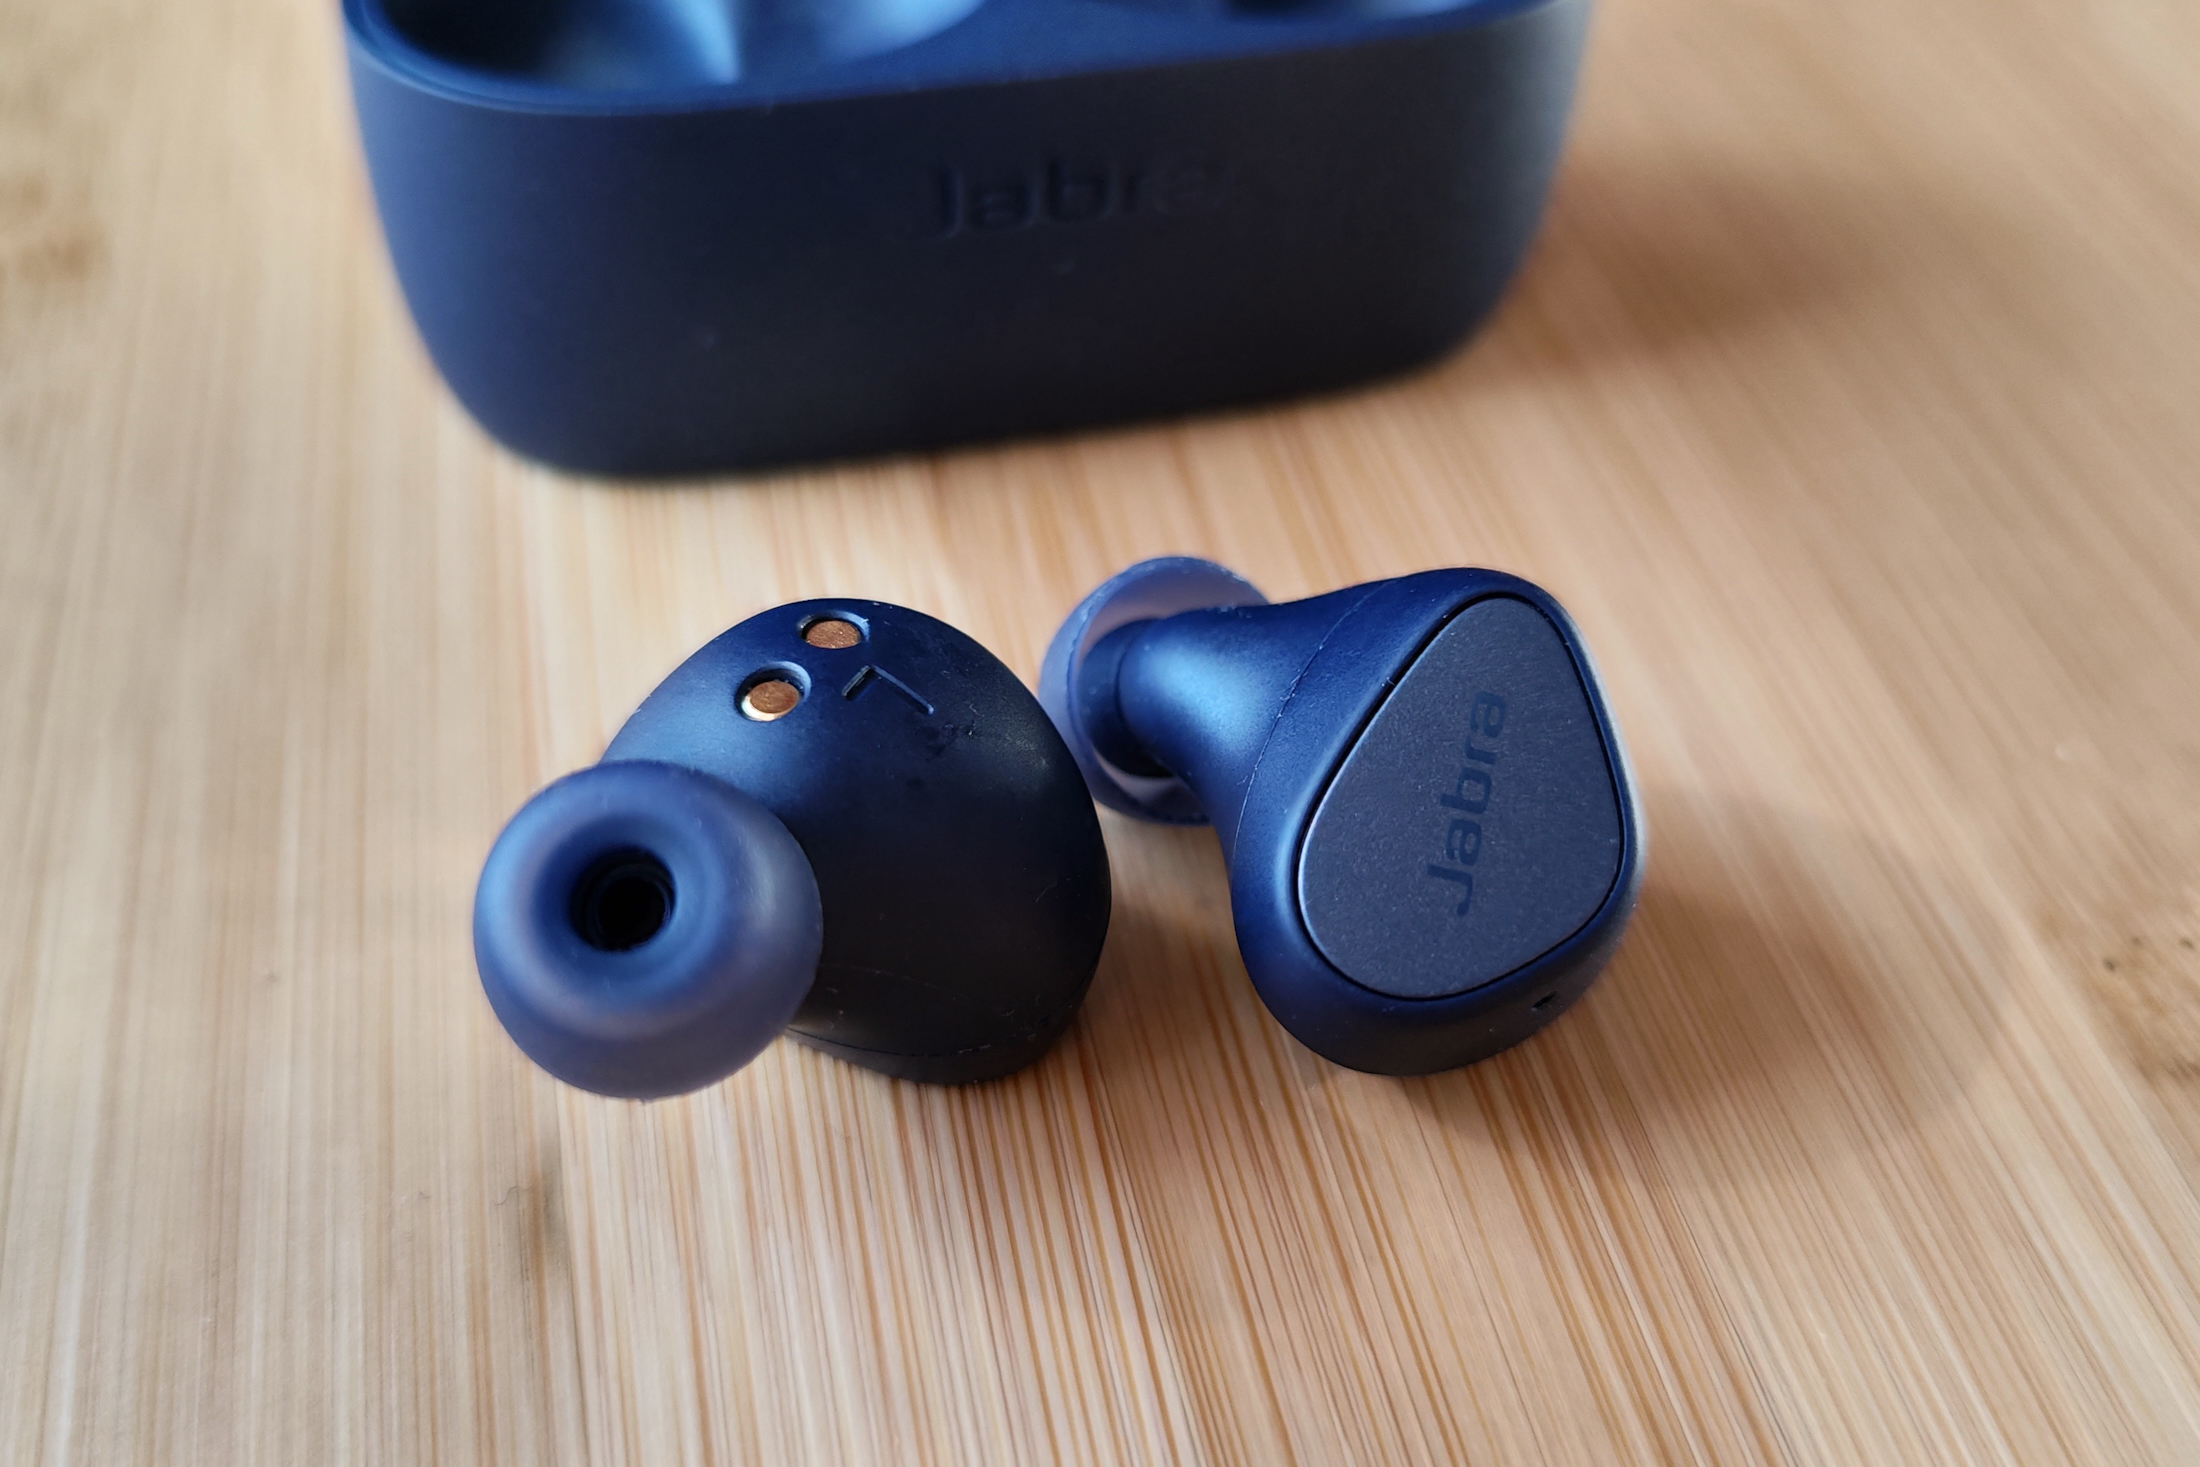 Jabra Elite 4 Active Review: Great Earbuds at a Great Price